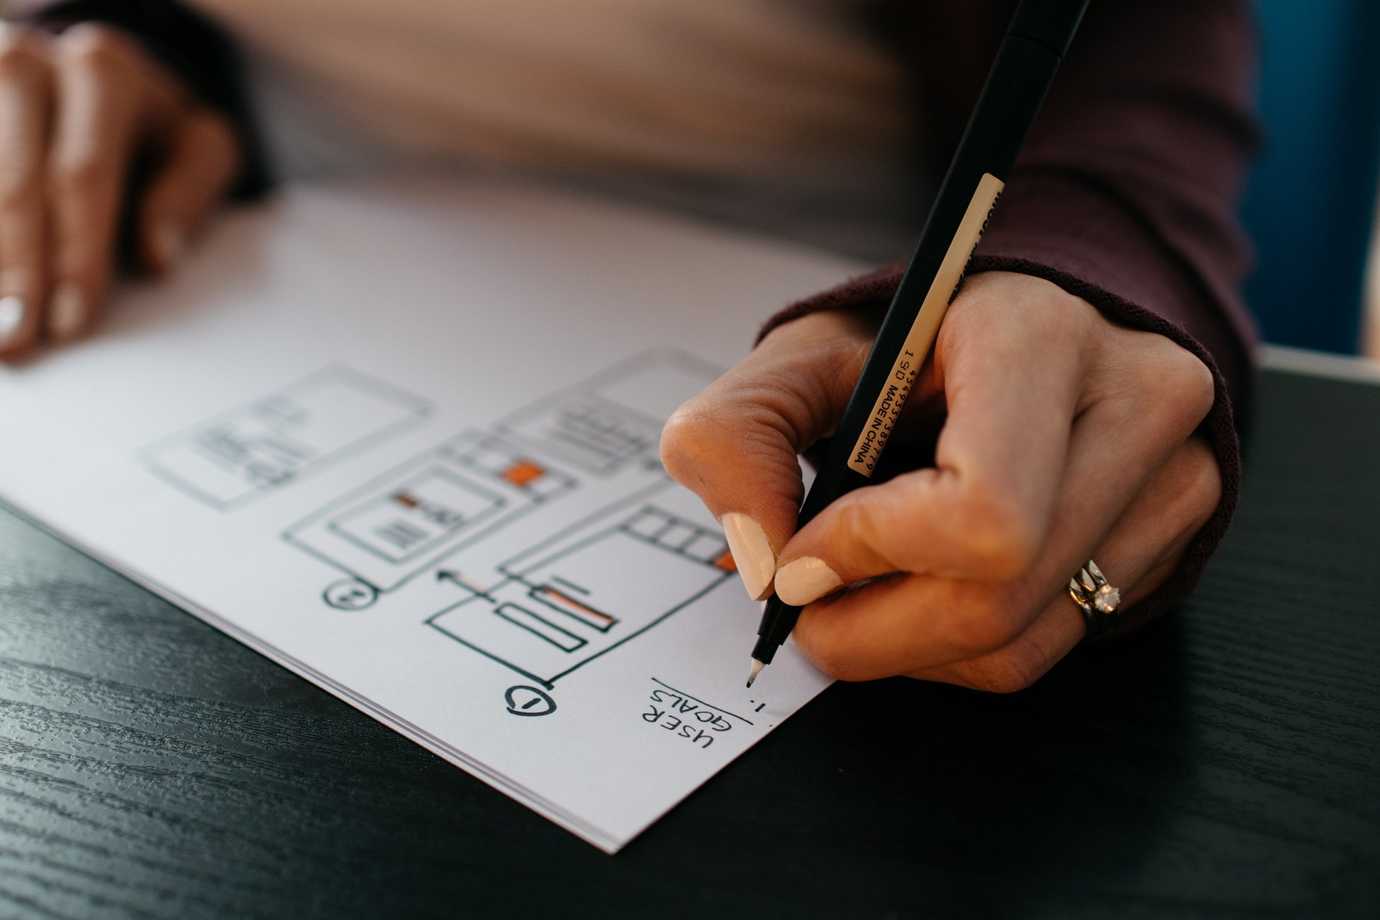 Designer drawing wireframes on paper, by Kelly Sikkema found at Unsplash 